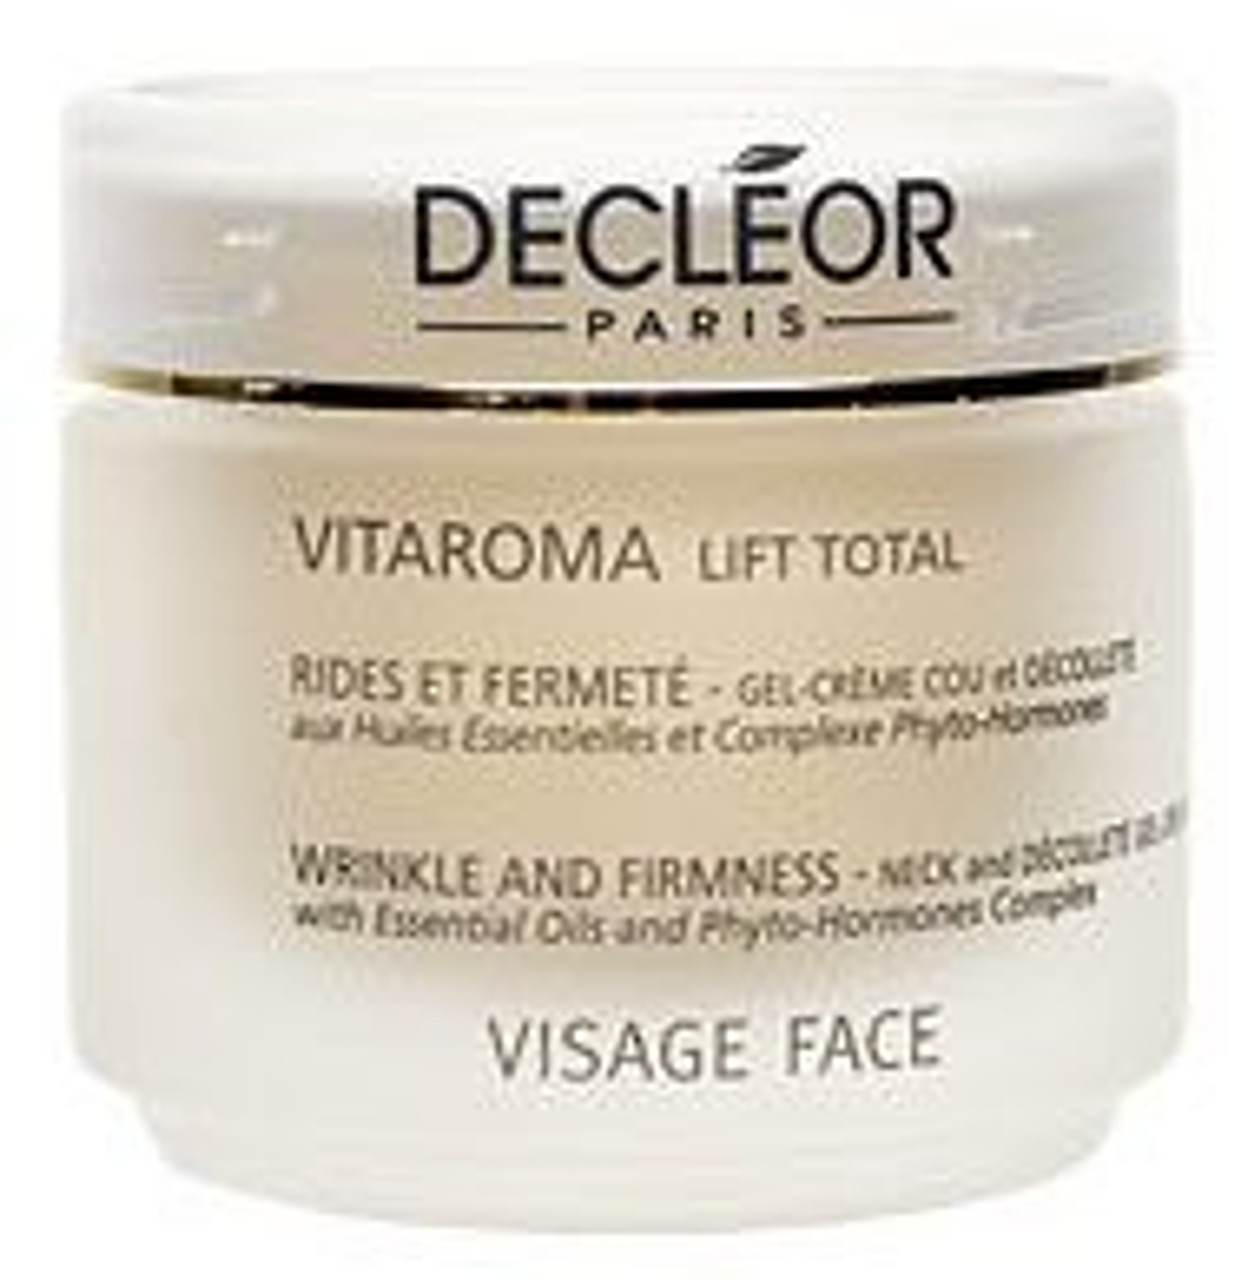 DECLEOR Vitaroma Lift Total Wrinkle Action and Firmness Face Cream, 1.69 oz